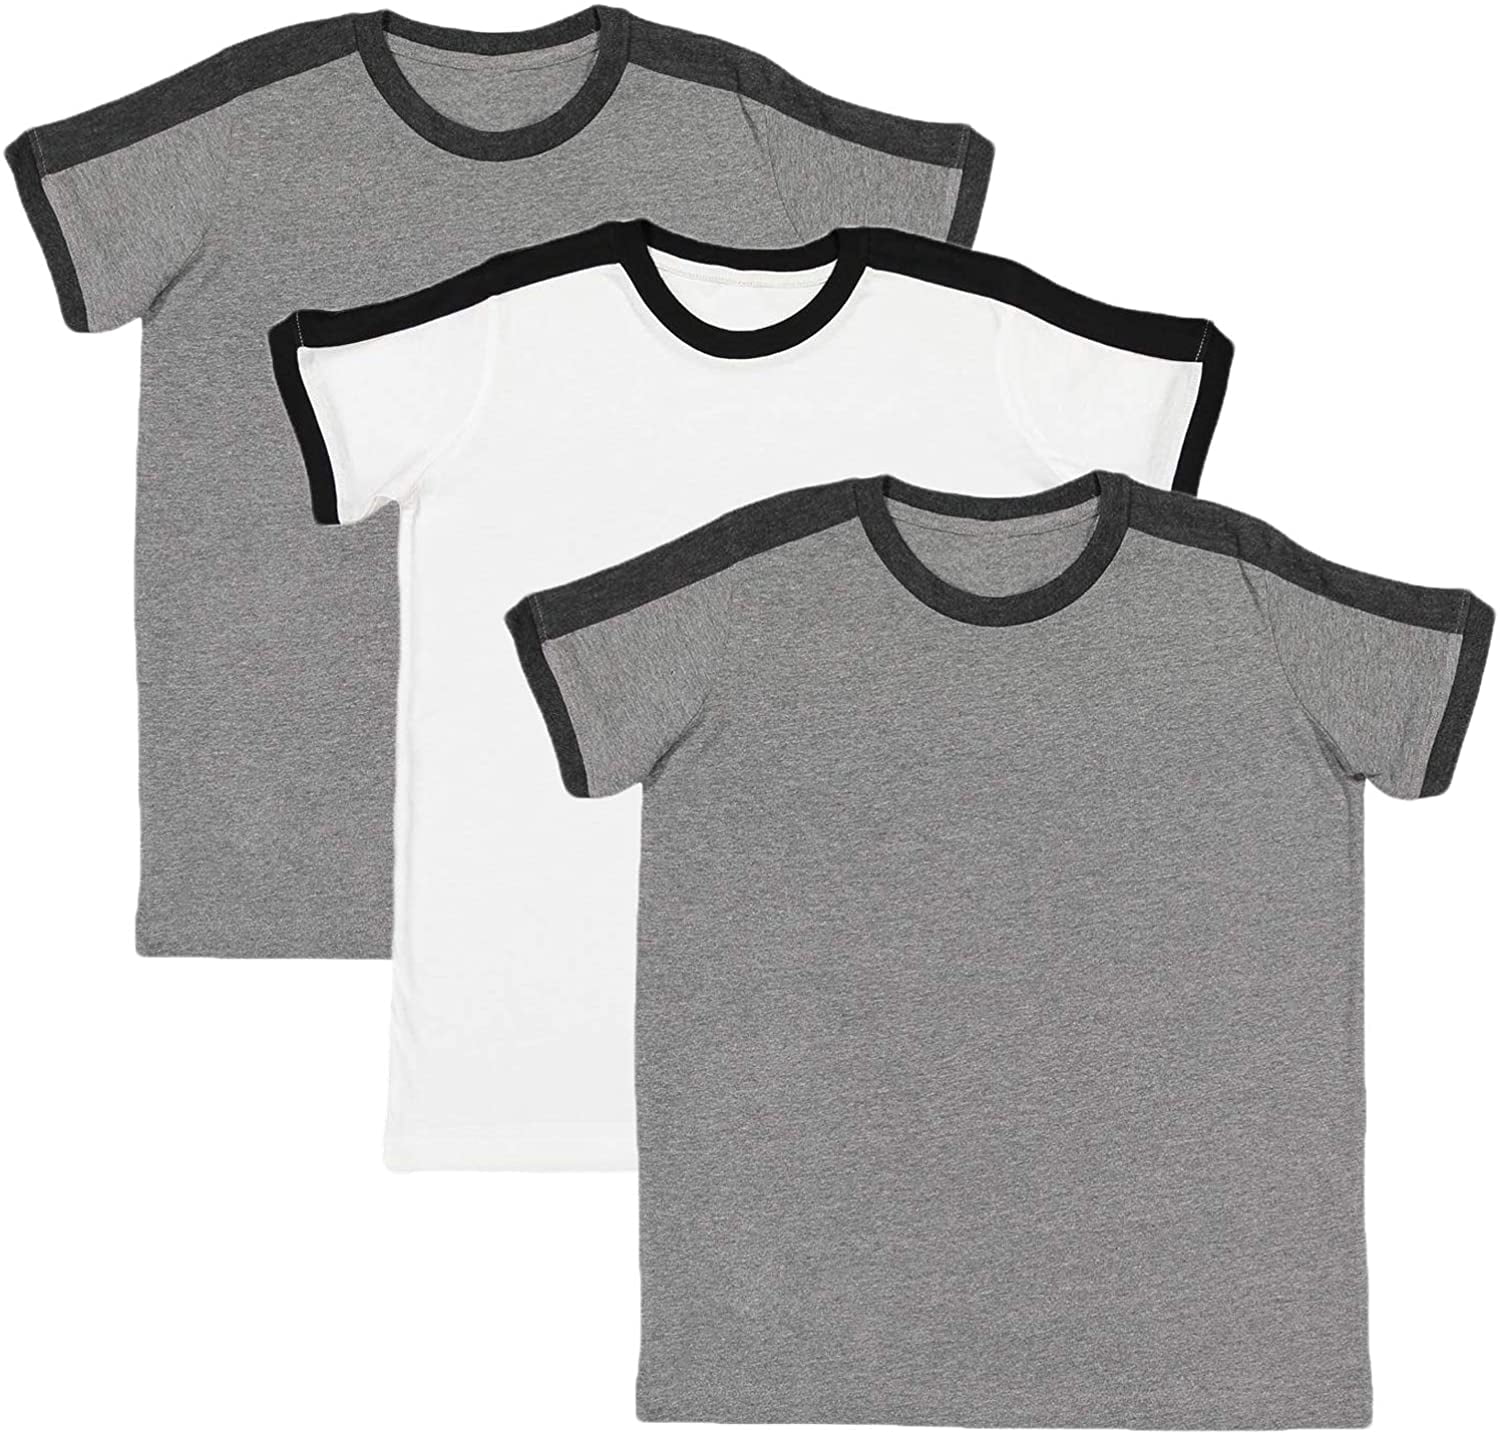 fancy t shirts for boys